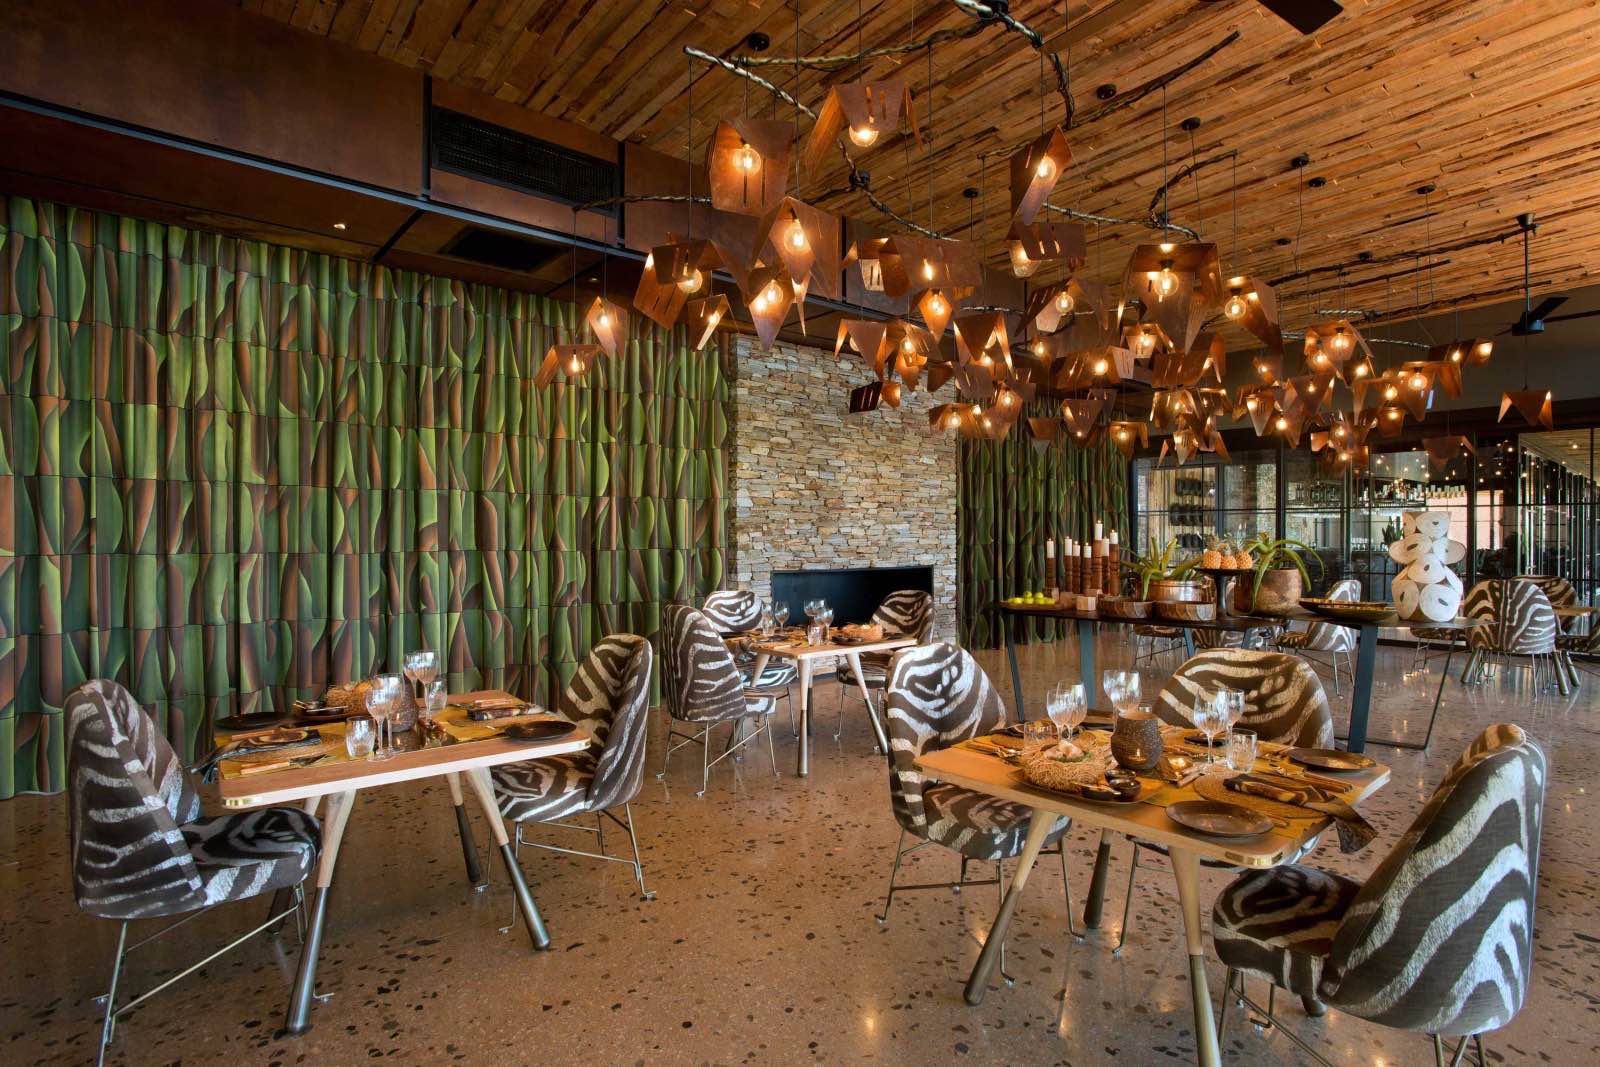 A modern-day jungle theme in the dining room